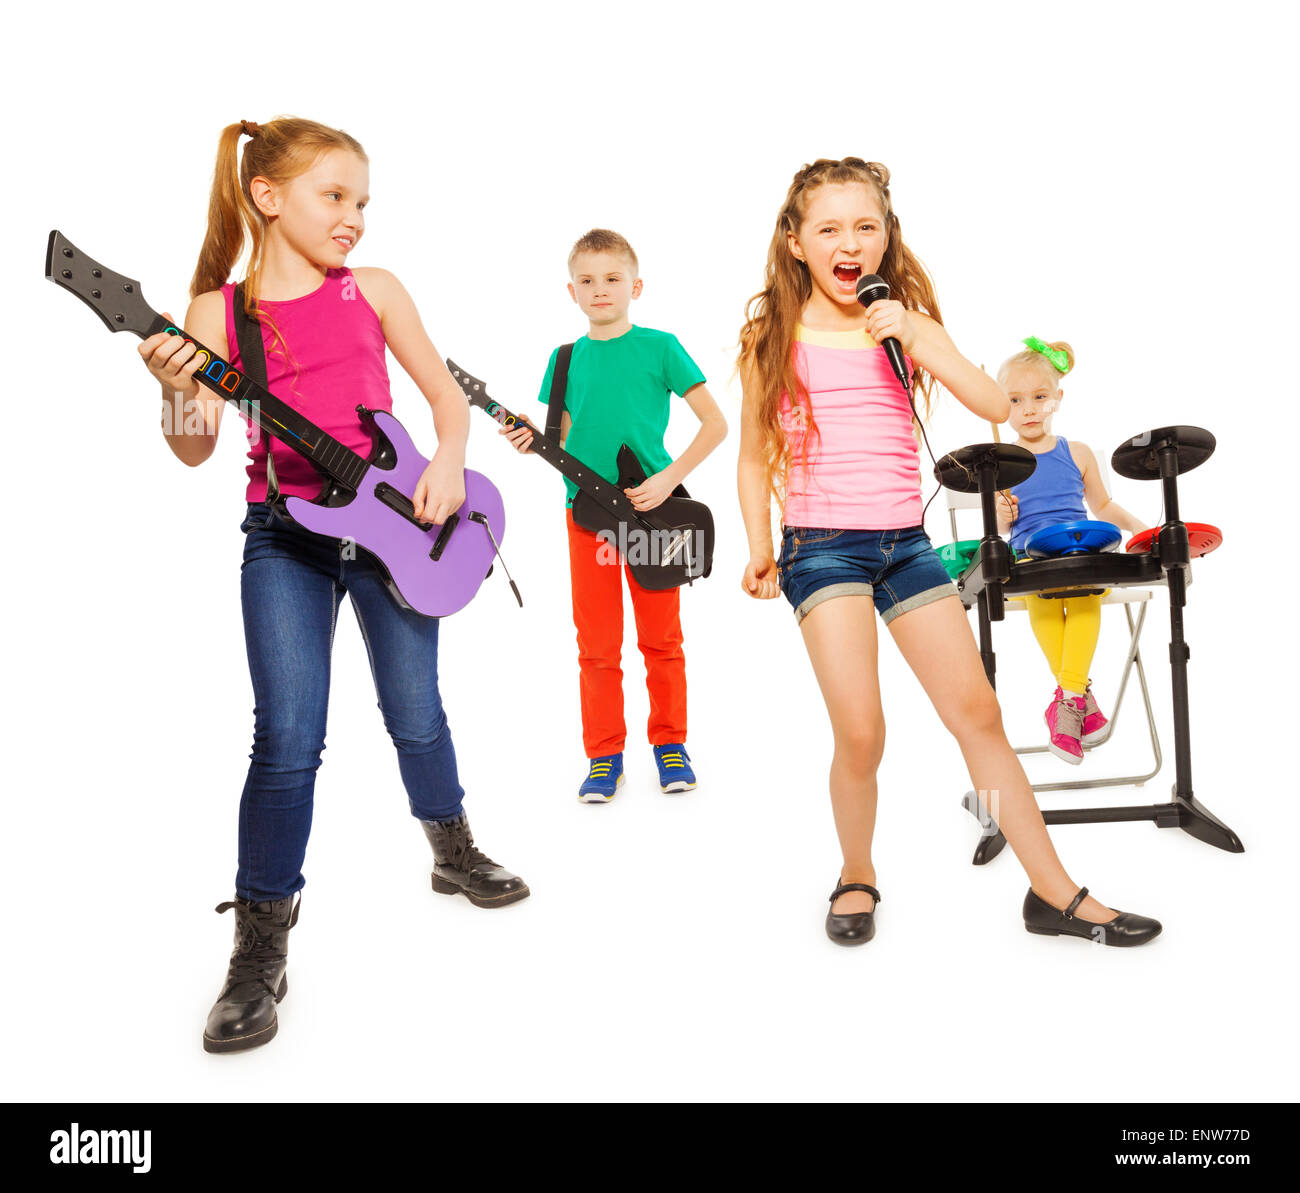 Cool kids play musical instruments as rock group Stock Photo - Alamy